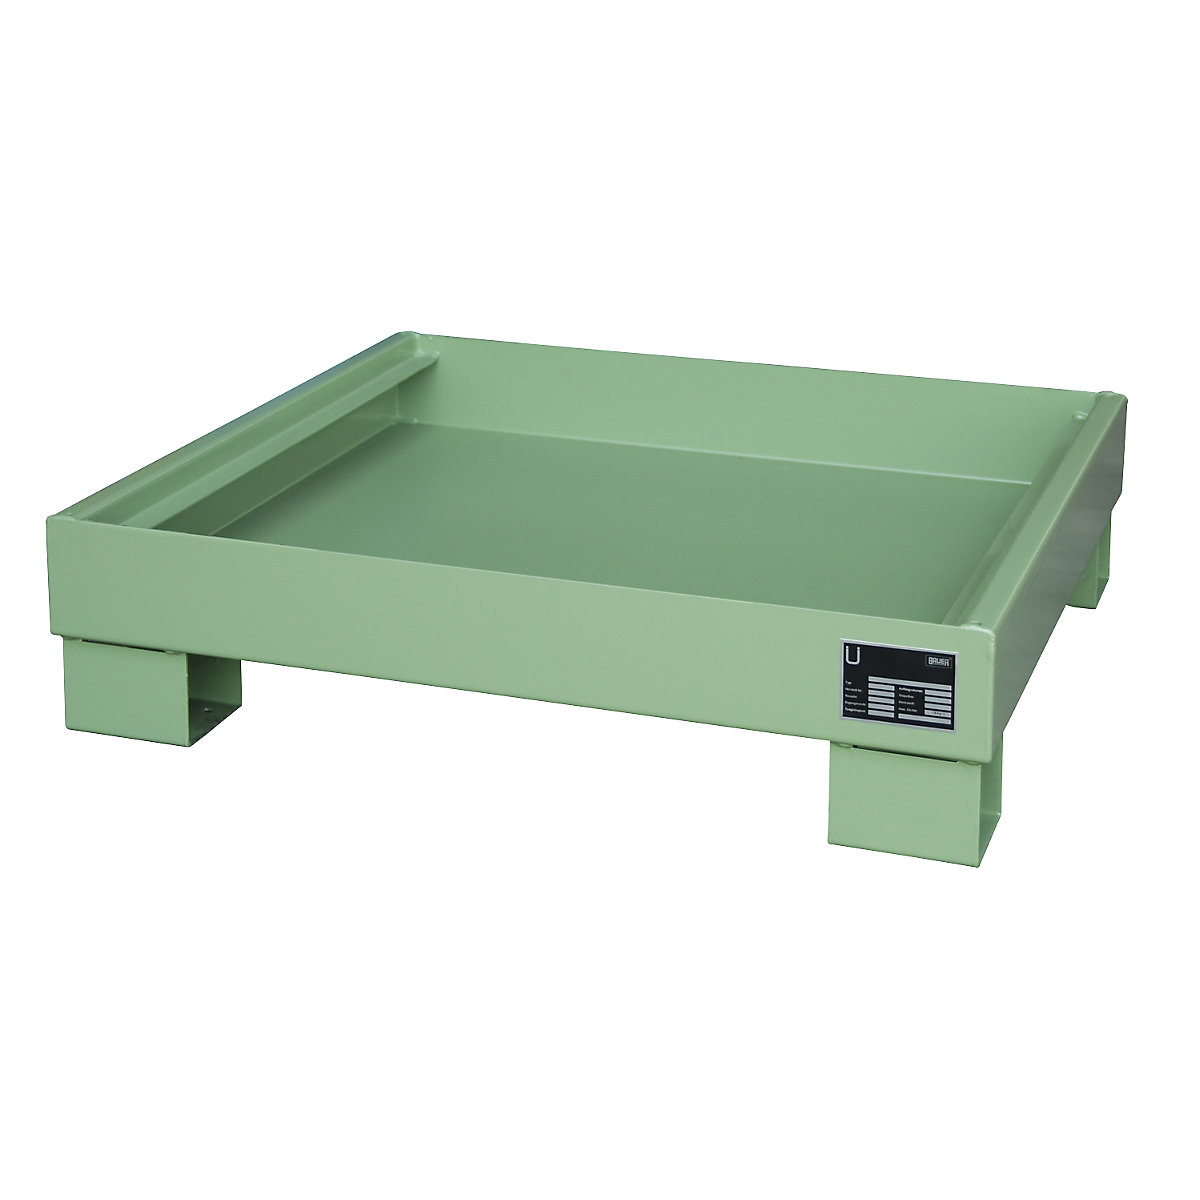 Steel sump tray for 60 l drum – eurokraft pro